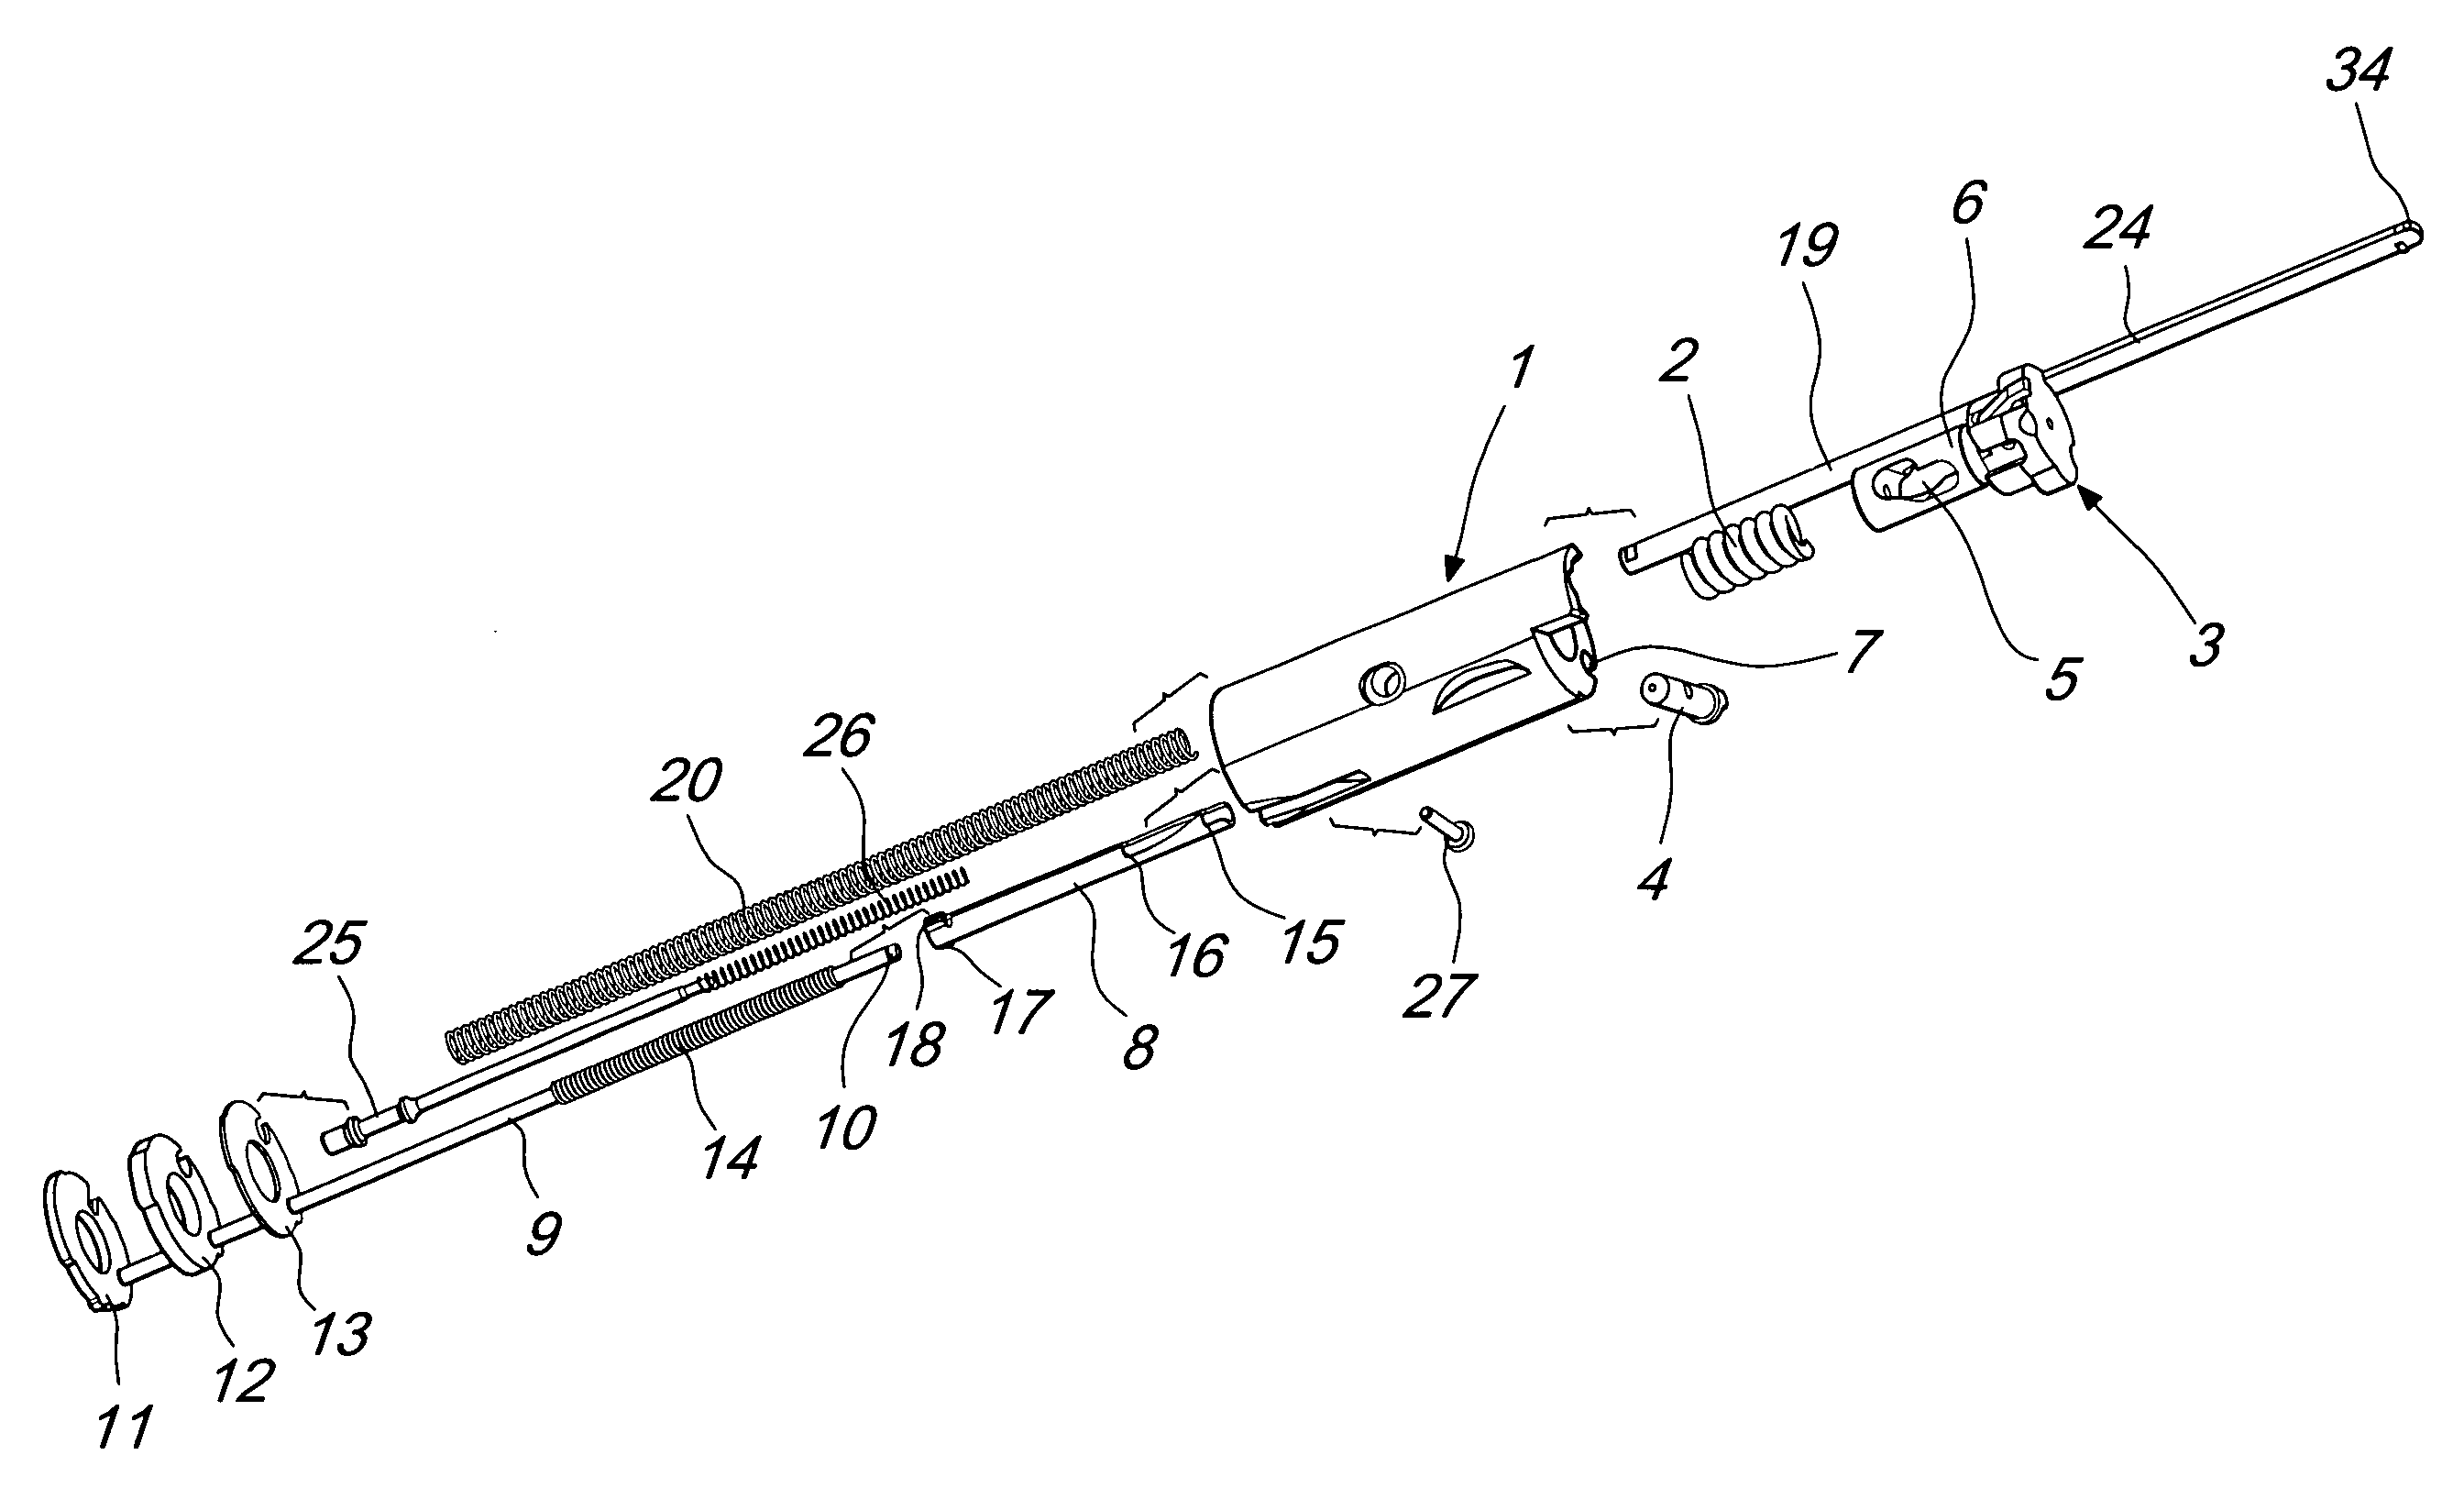 Locking and recocking assembly with swivel breech-lock and rotating locking head, particularly for inertially-actuated weapons using the kinetic energy of recoil